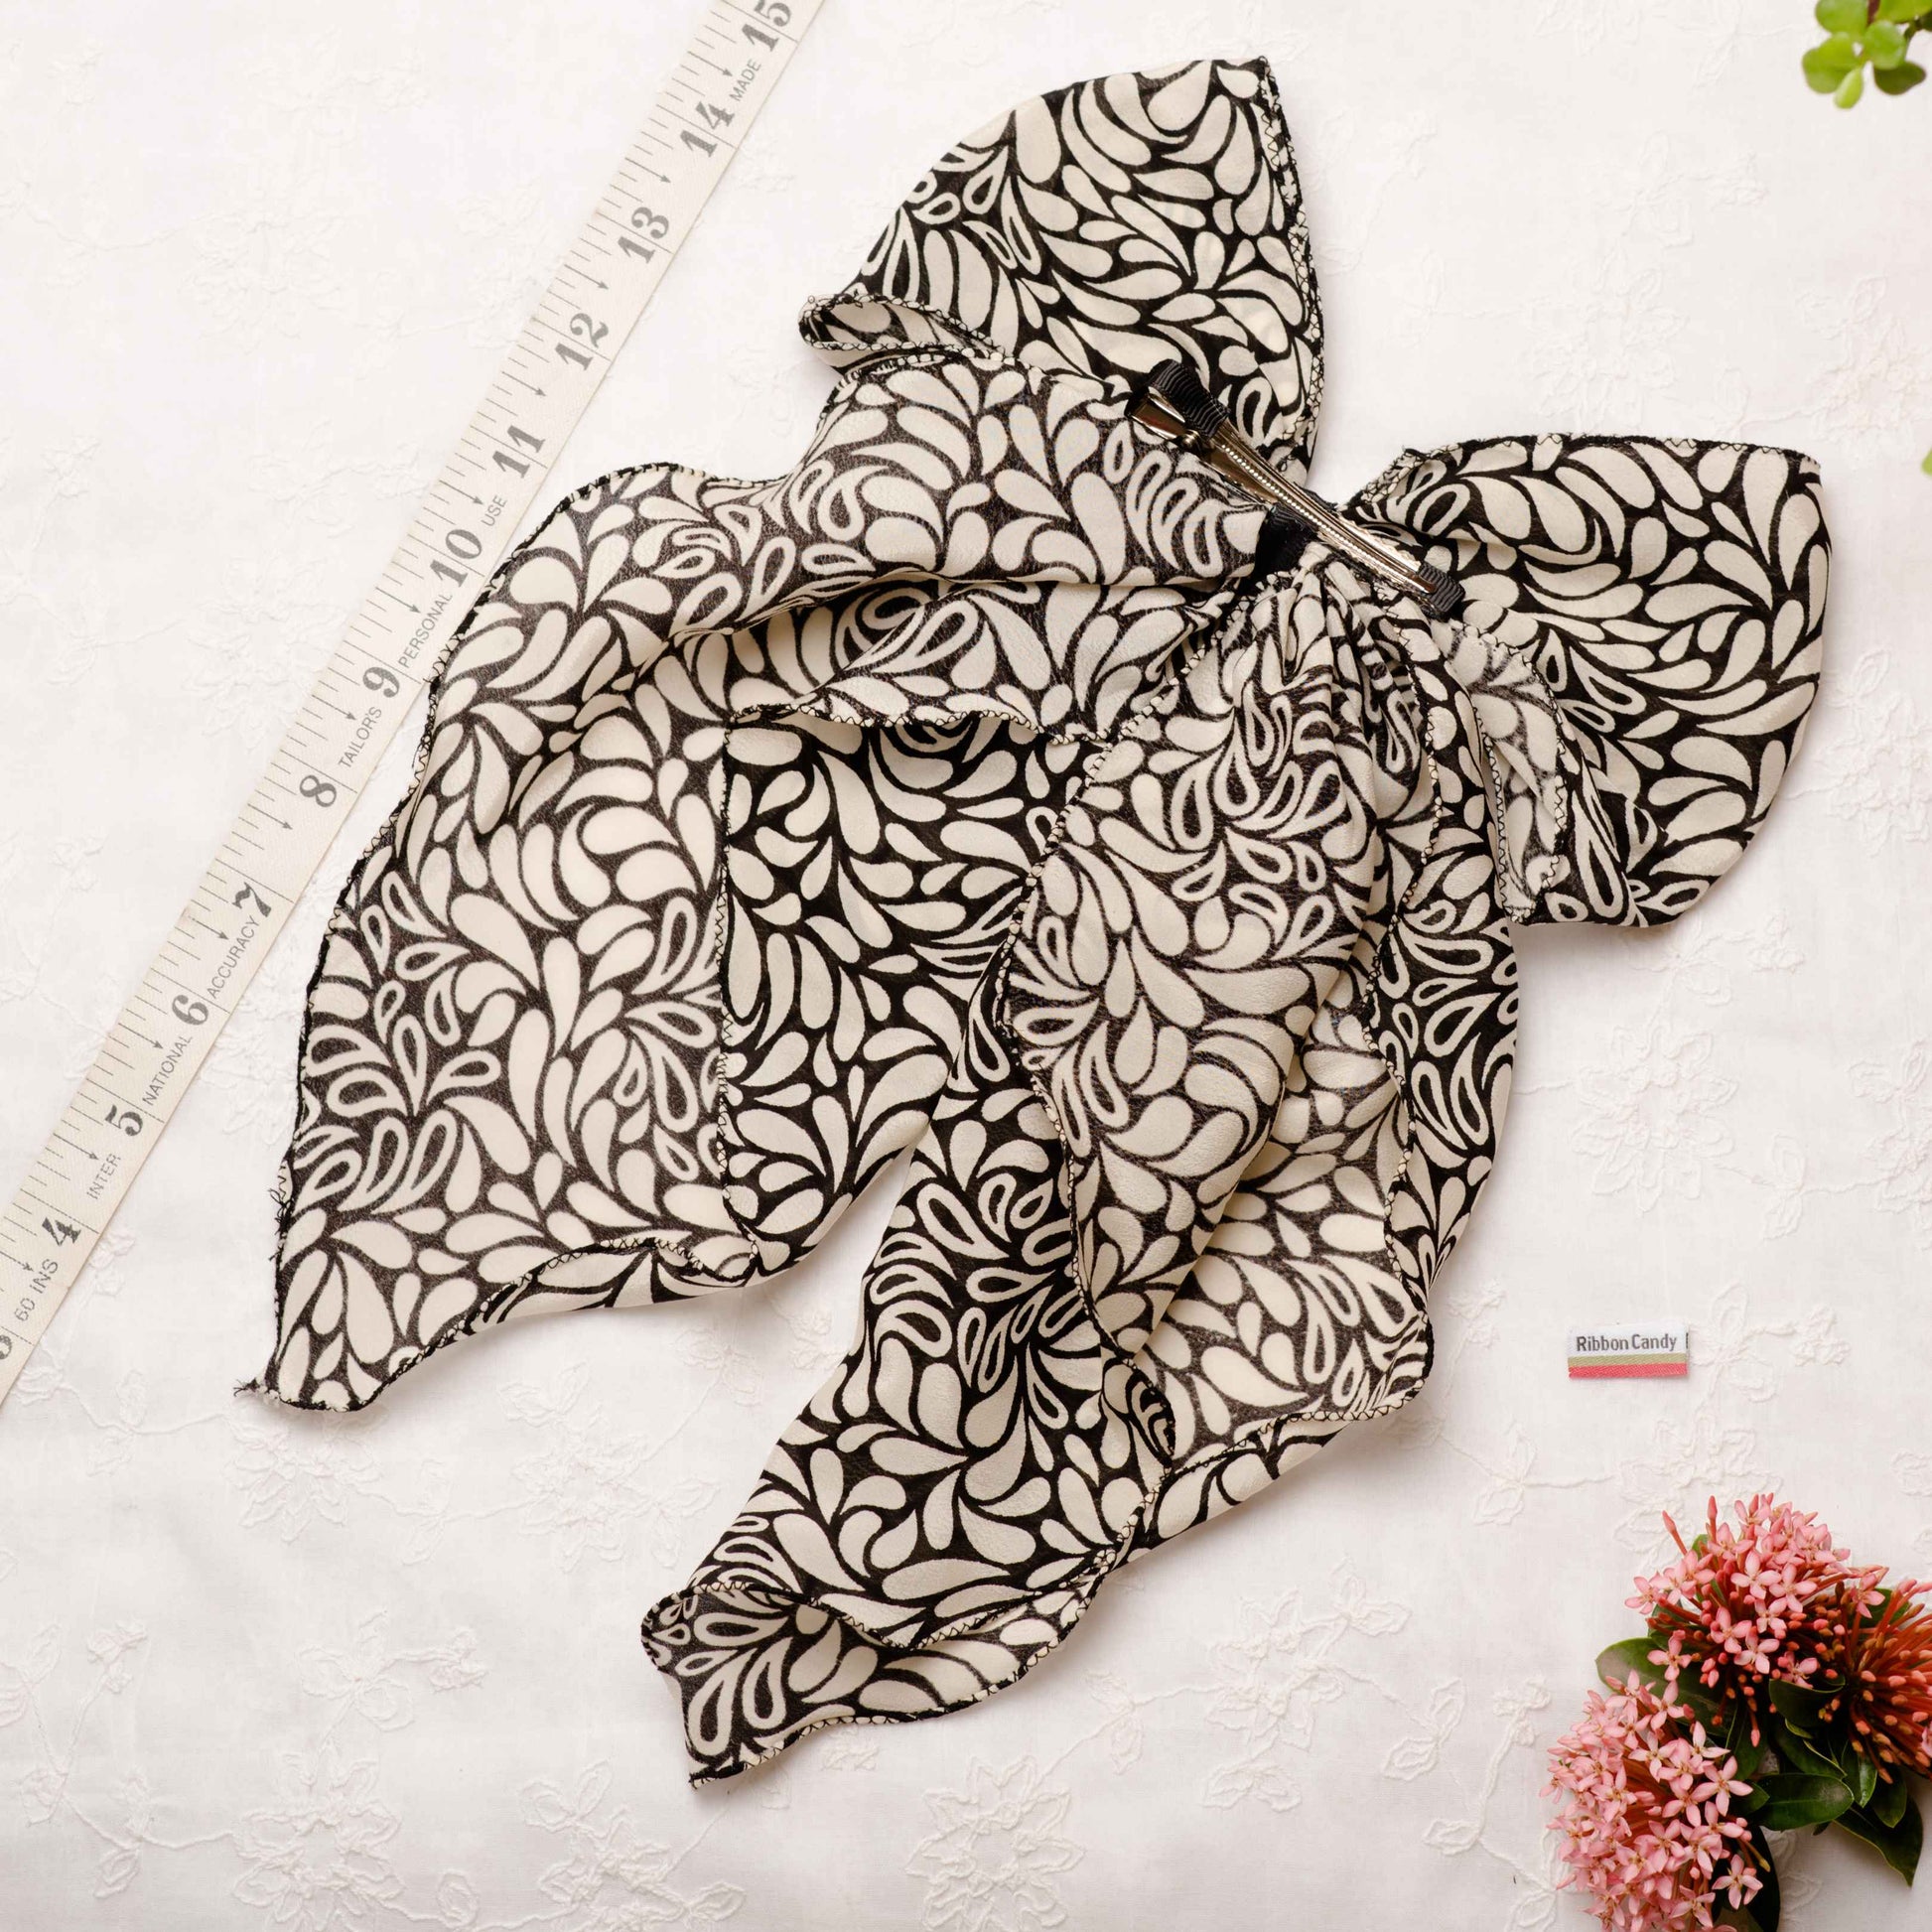 Printed Large Scarf Alligator Clip - Black and White